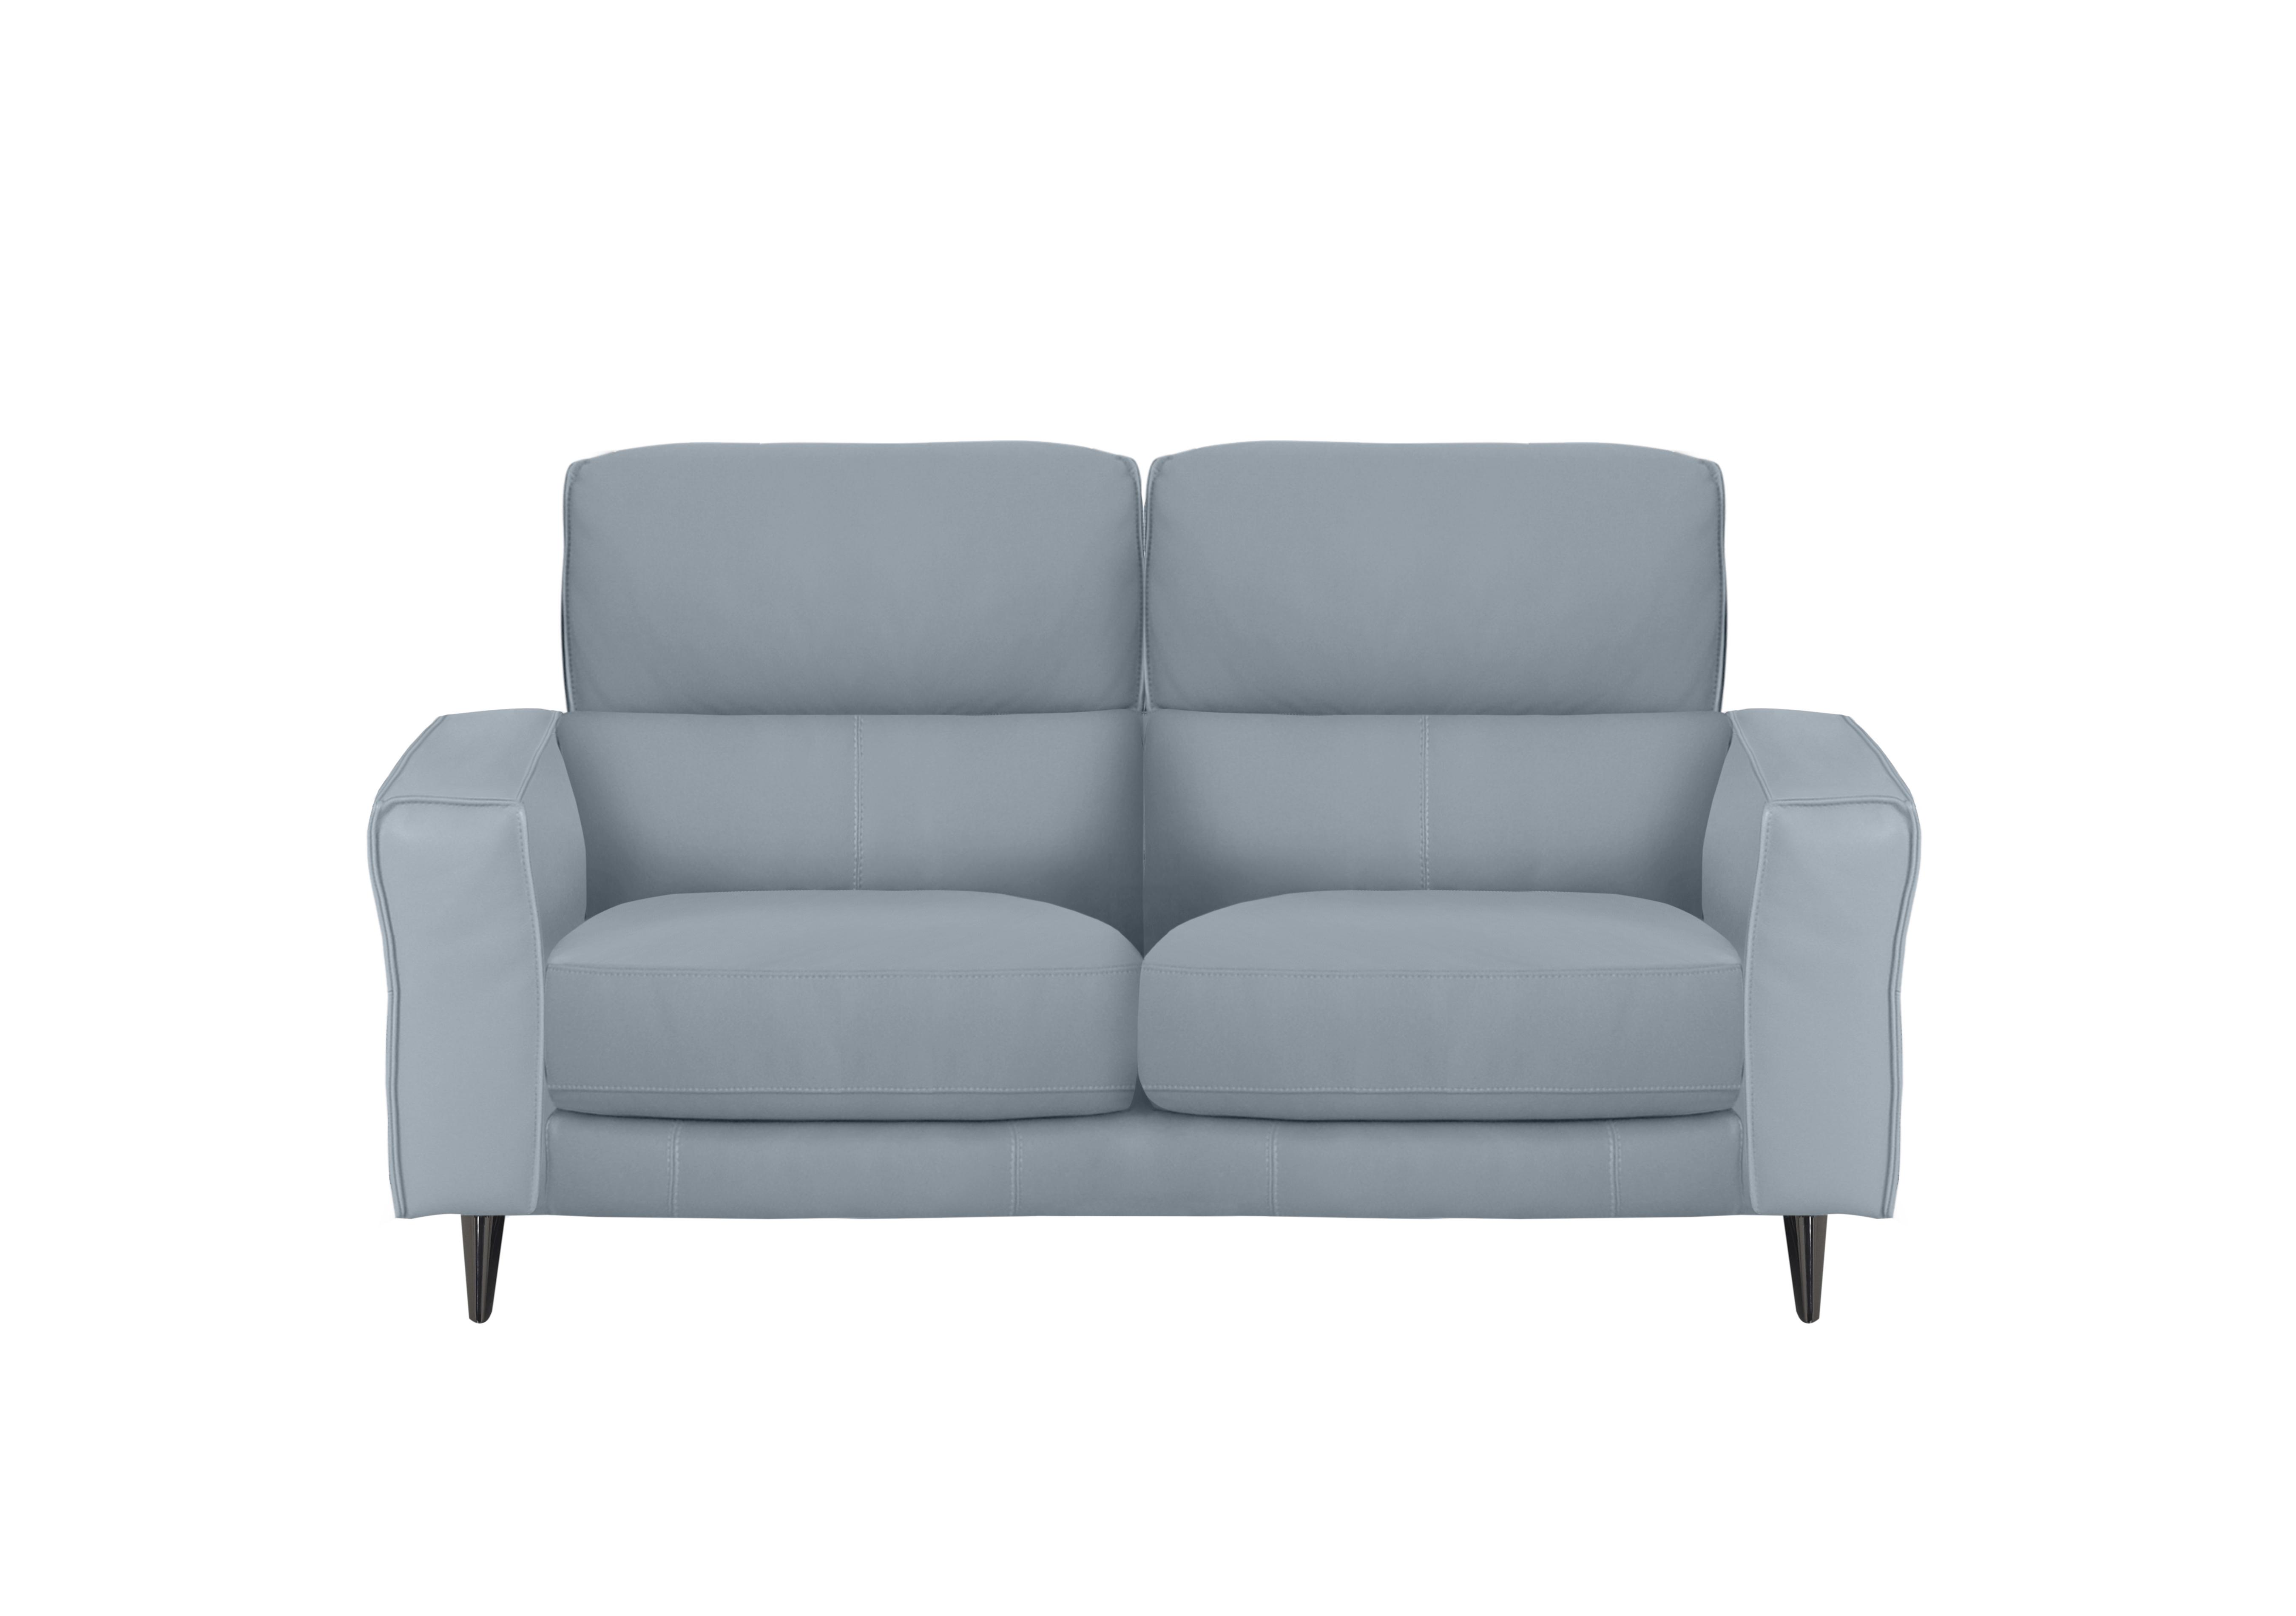 Axel 2 Seater Leather Sofa in Nc-026e Pearl Blue on Furniture Village